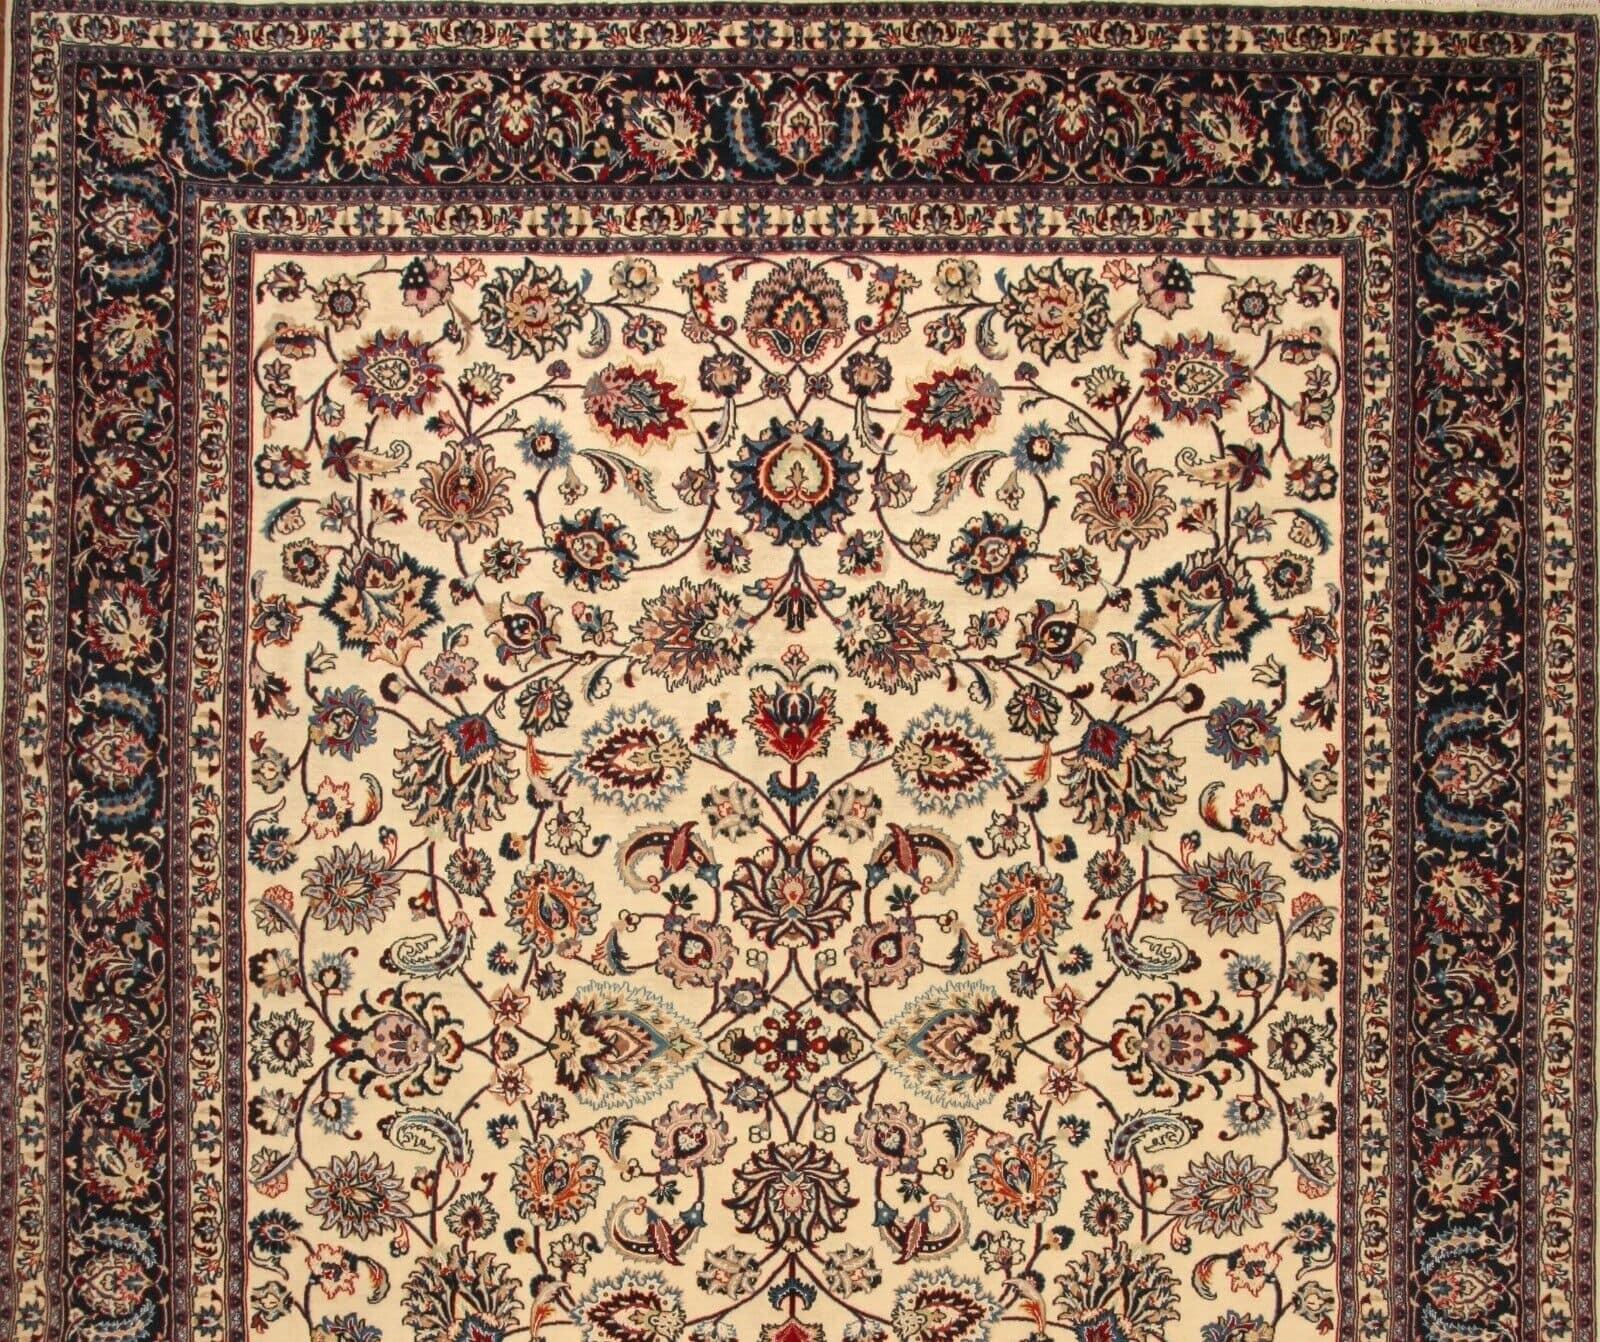 Wool Handmade Contemporary Persian Style Tabriz Rug 10' x 12.7', 2000s - 1T04 For Sale